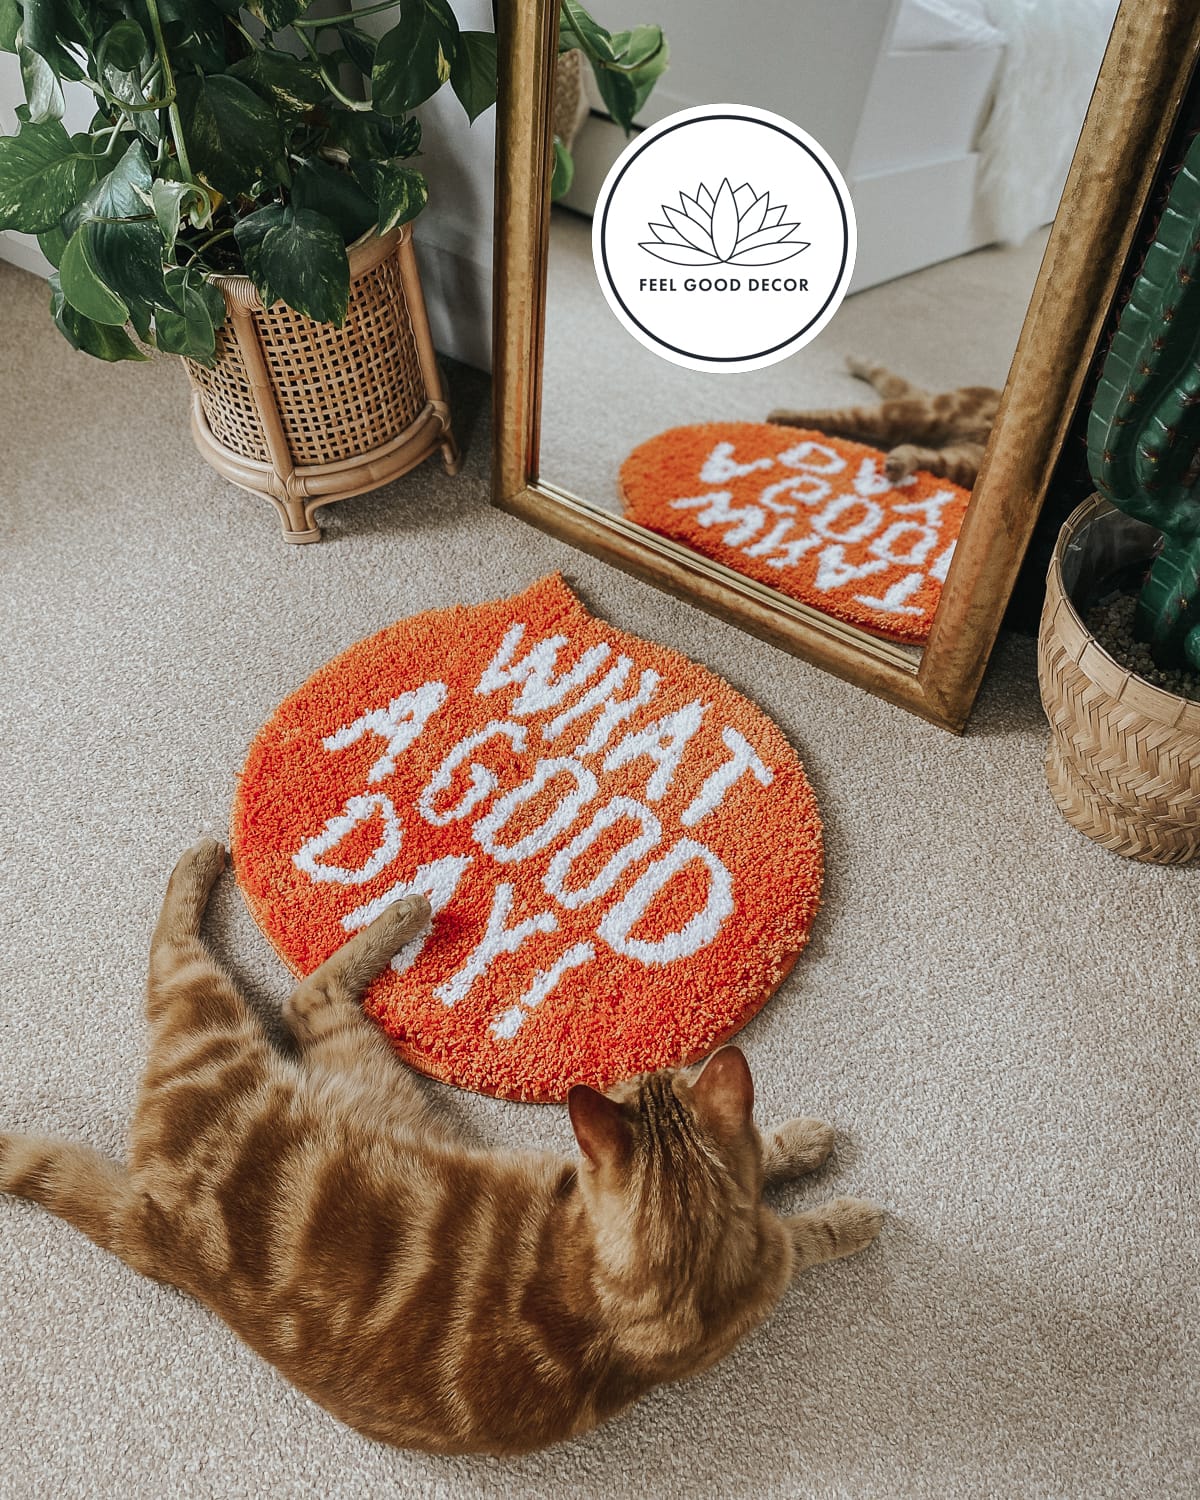 What A Good Day Positive Quote Decorative Orange Floor Mat Small Rug 45 x  50cm - Feel Good Decor